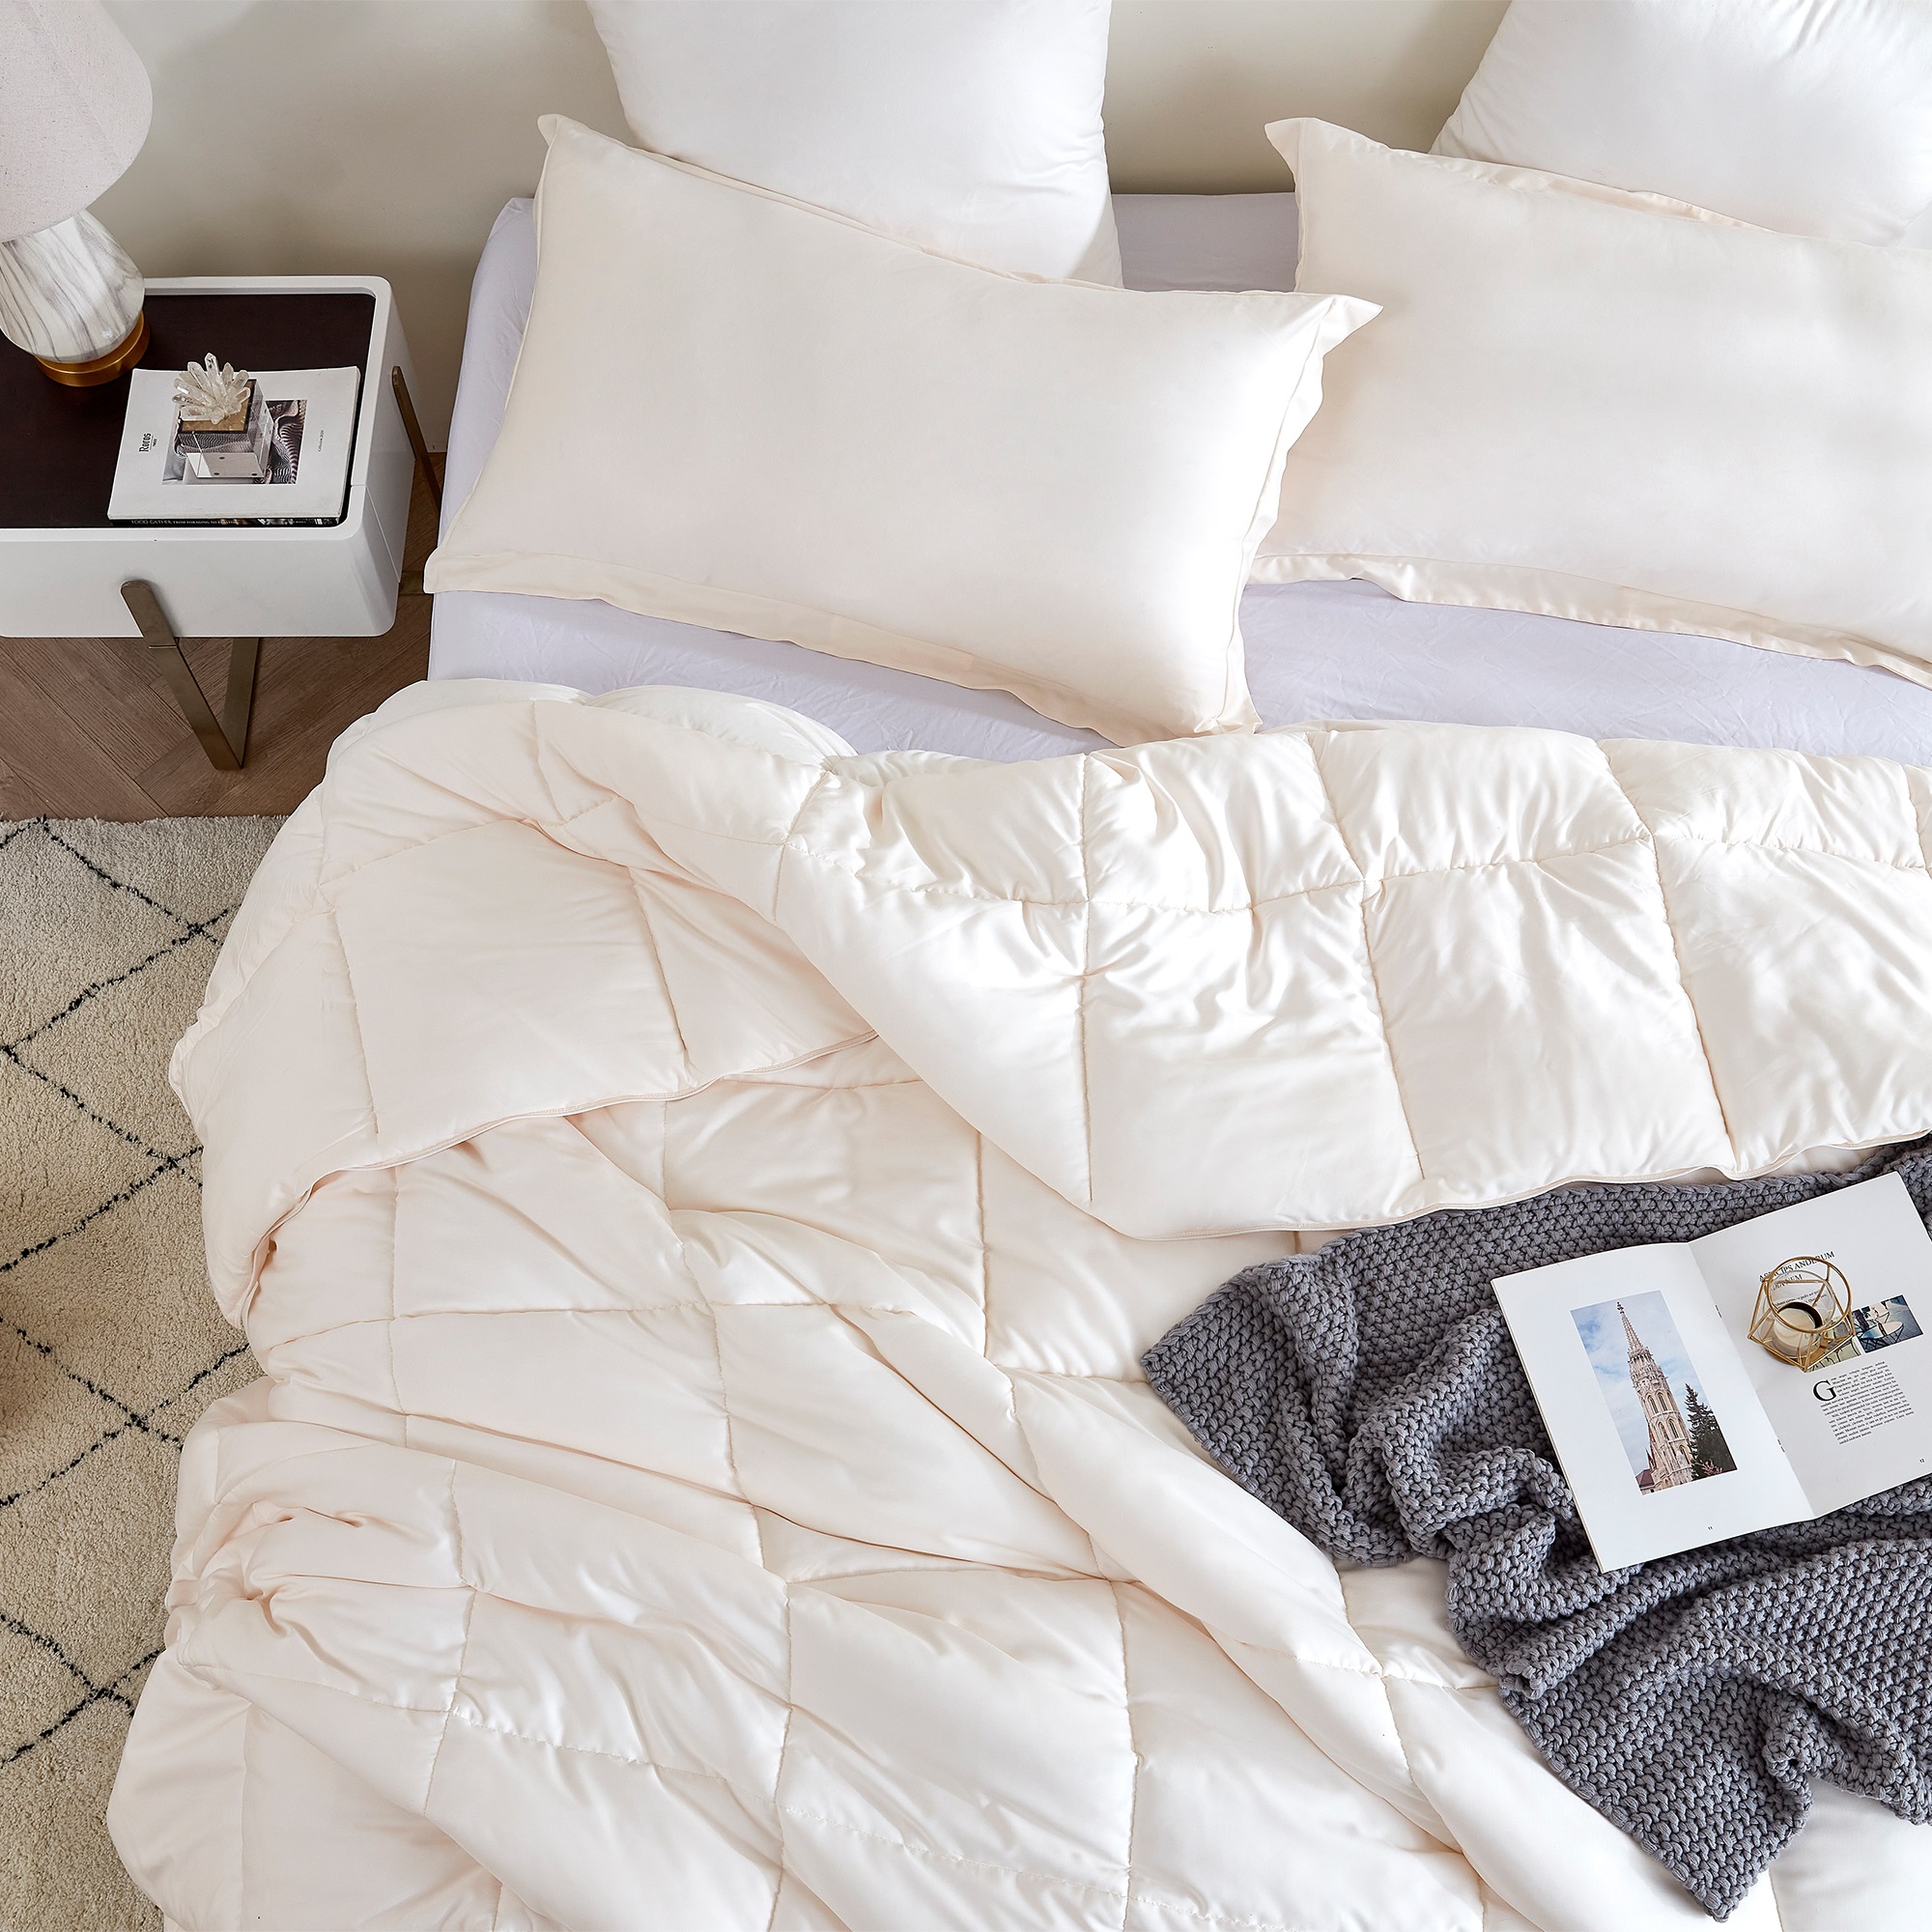 Snorze Cloud Comforter - Coma Inducer Ultra Cozy Bamboo - Oversized Comforter in Sugar Swizzle